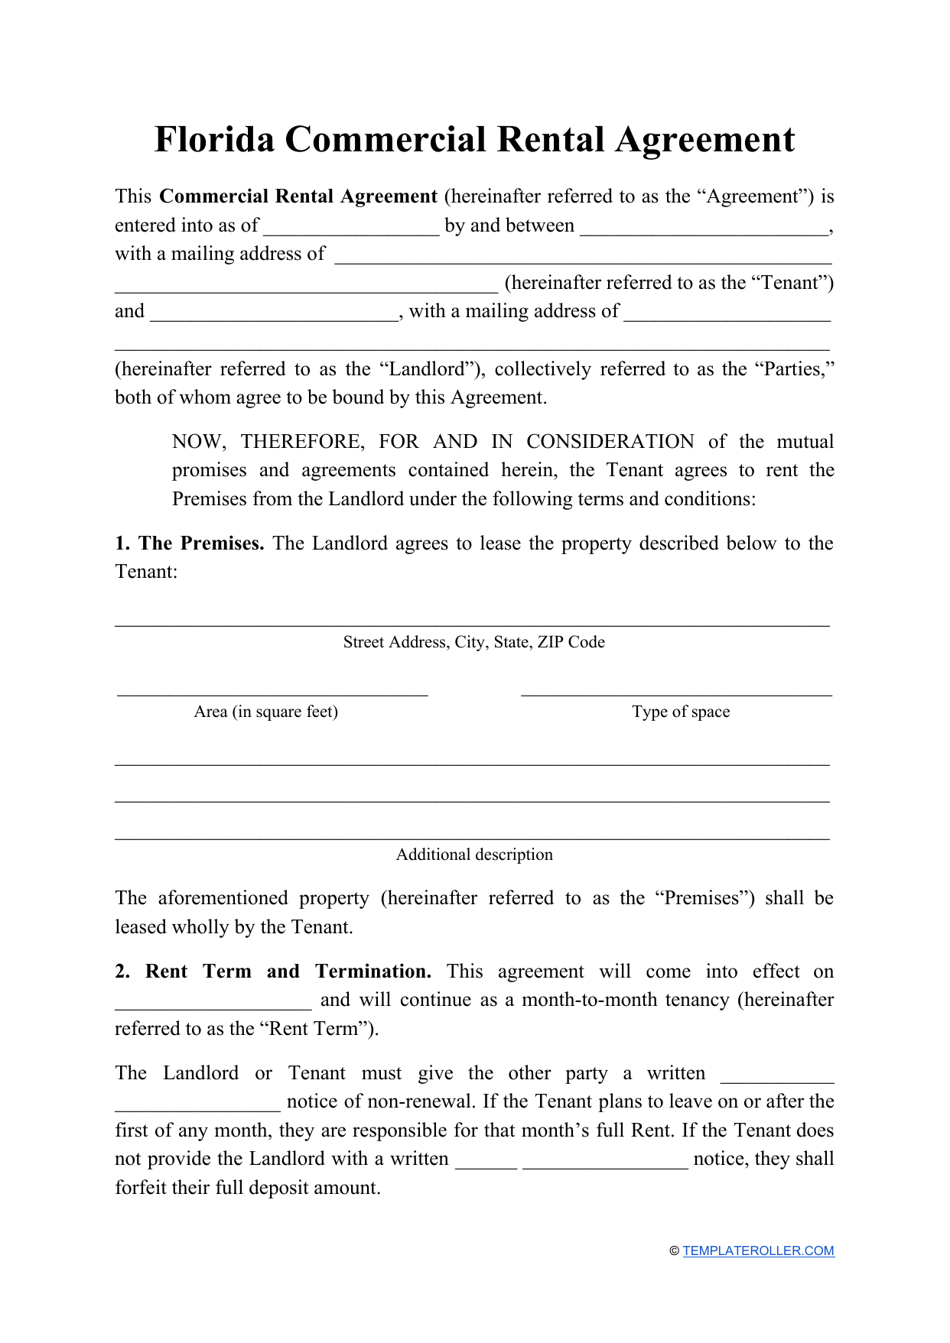 Florida Commercial Rental Agreement Template Fill Out, Sign Online